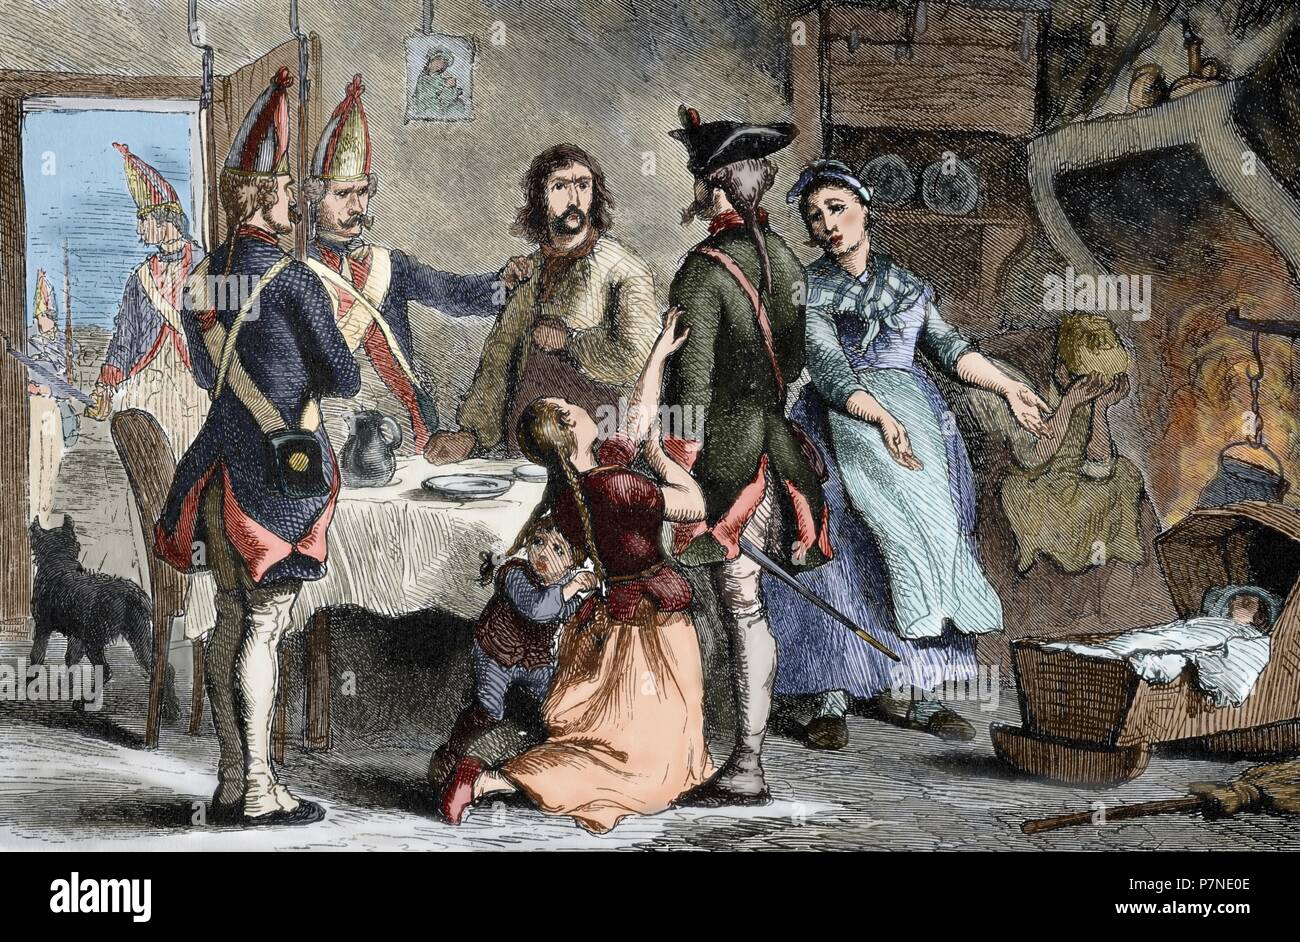 American Revolutionary War (1775-1783). Hessian recruited as a soldier by the British military service while his family begs them not to recruit him. They are most widely associated with combat operations in the American War of Independence. Engraving by Darley. 19th century. Colored. Stock Photo